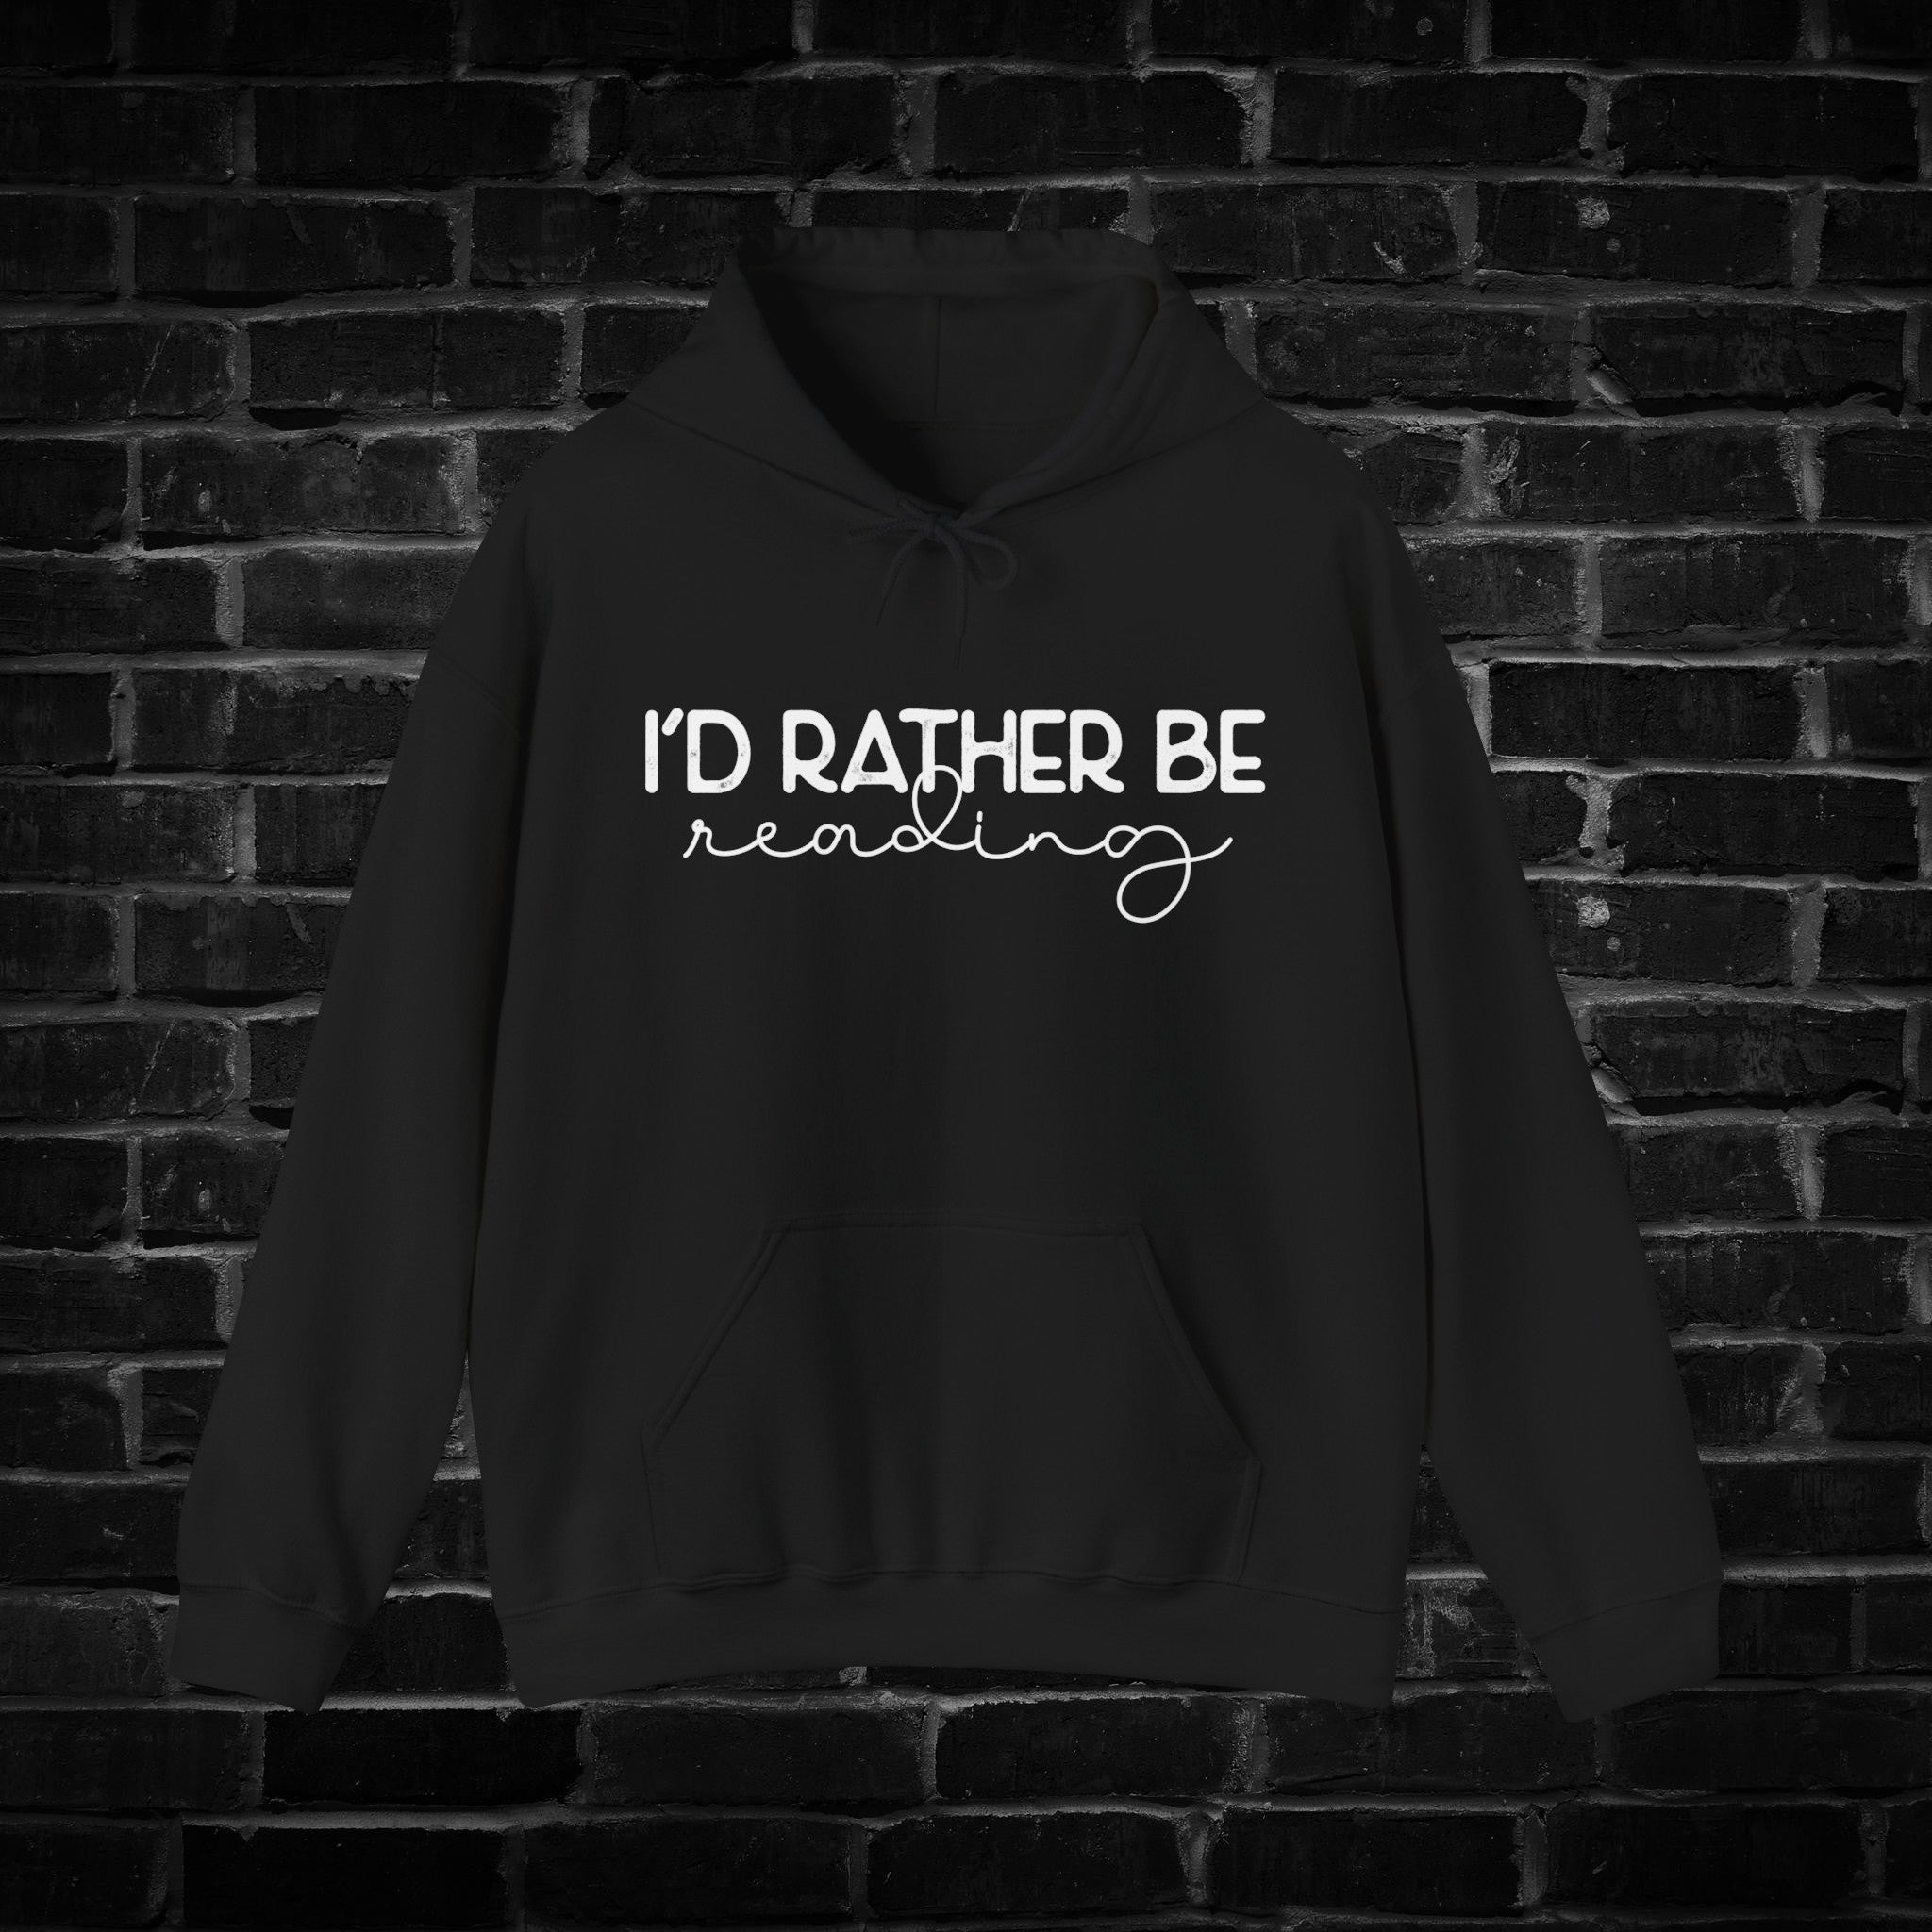 I'd Rather be Reading Hoodie